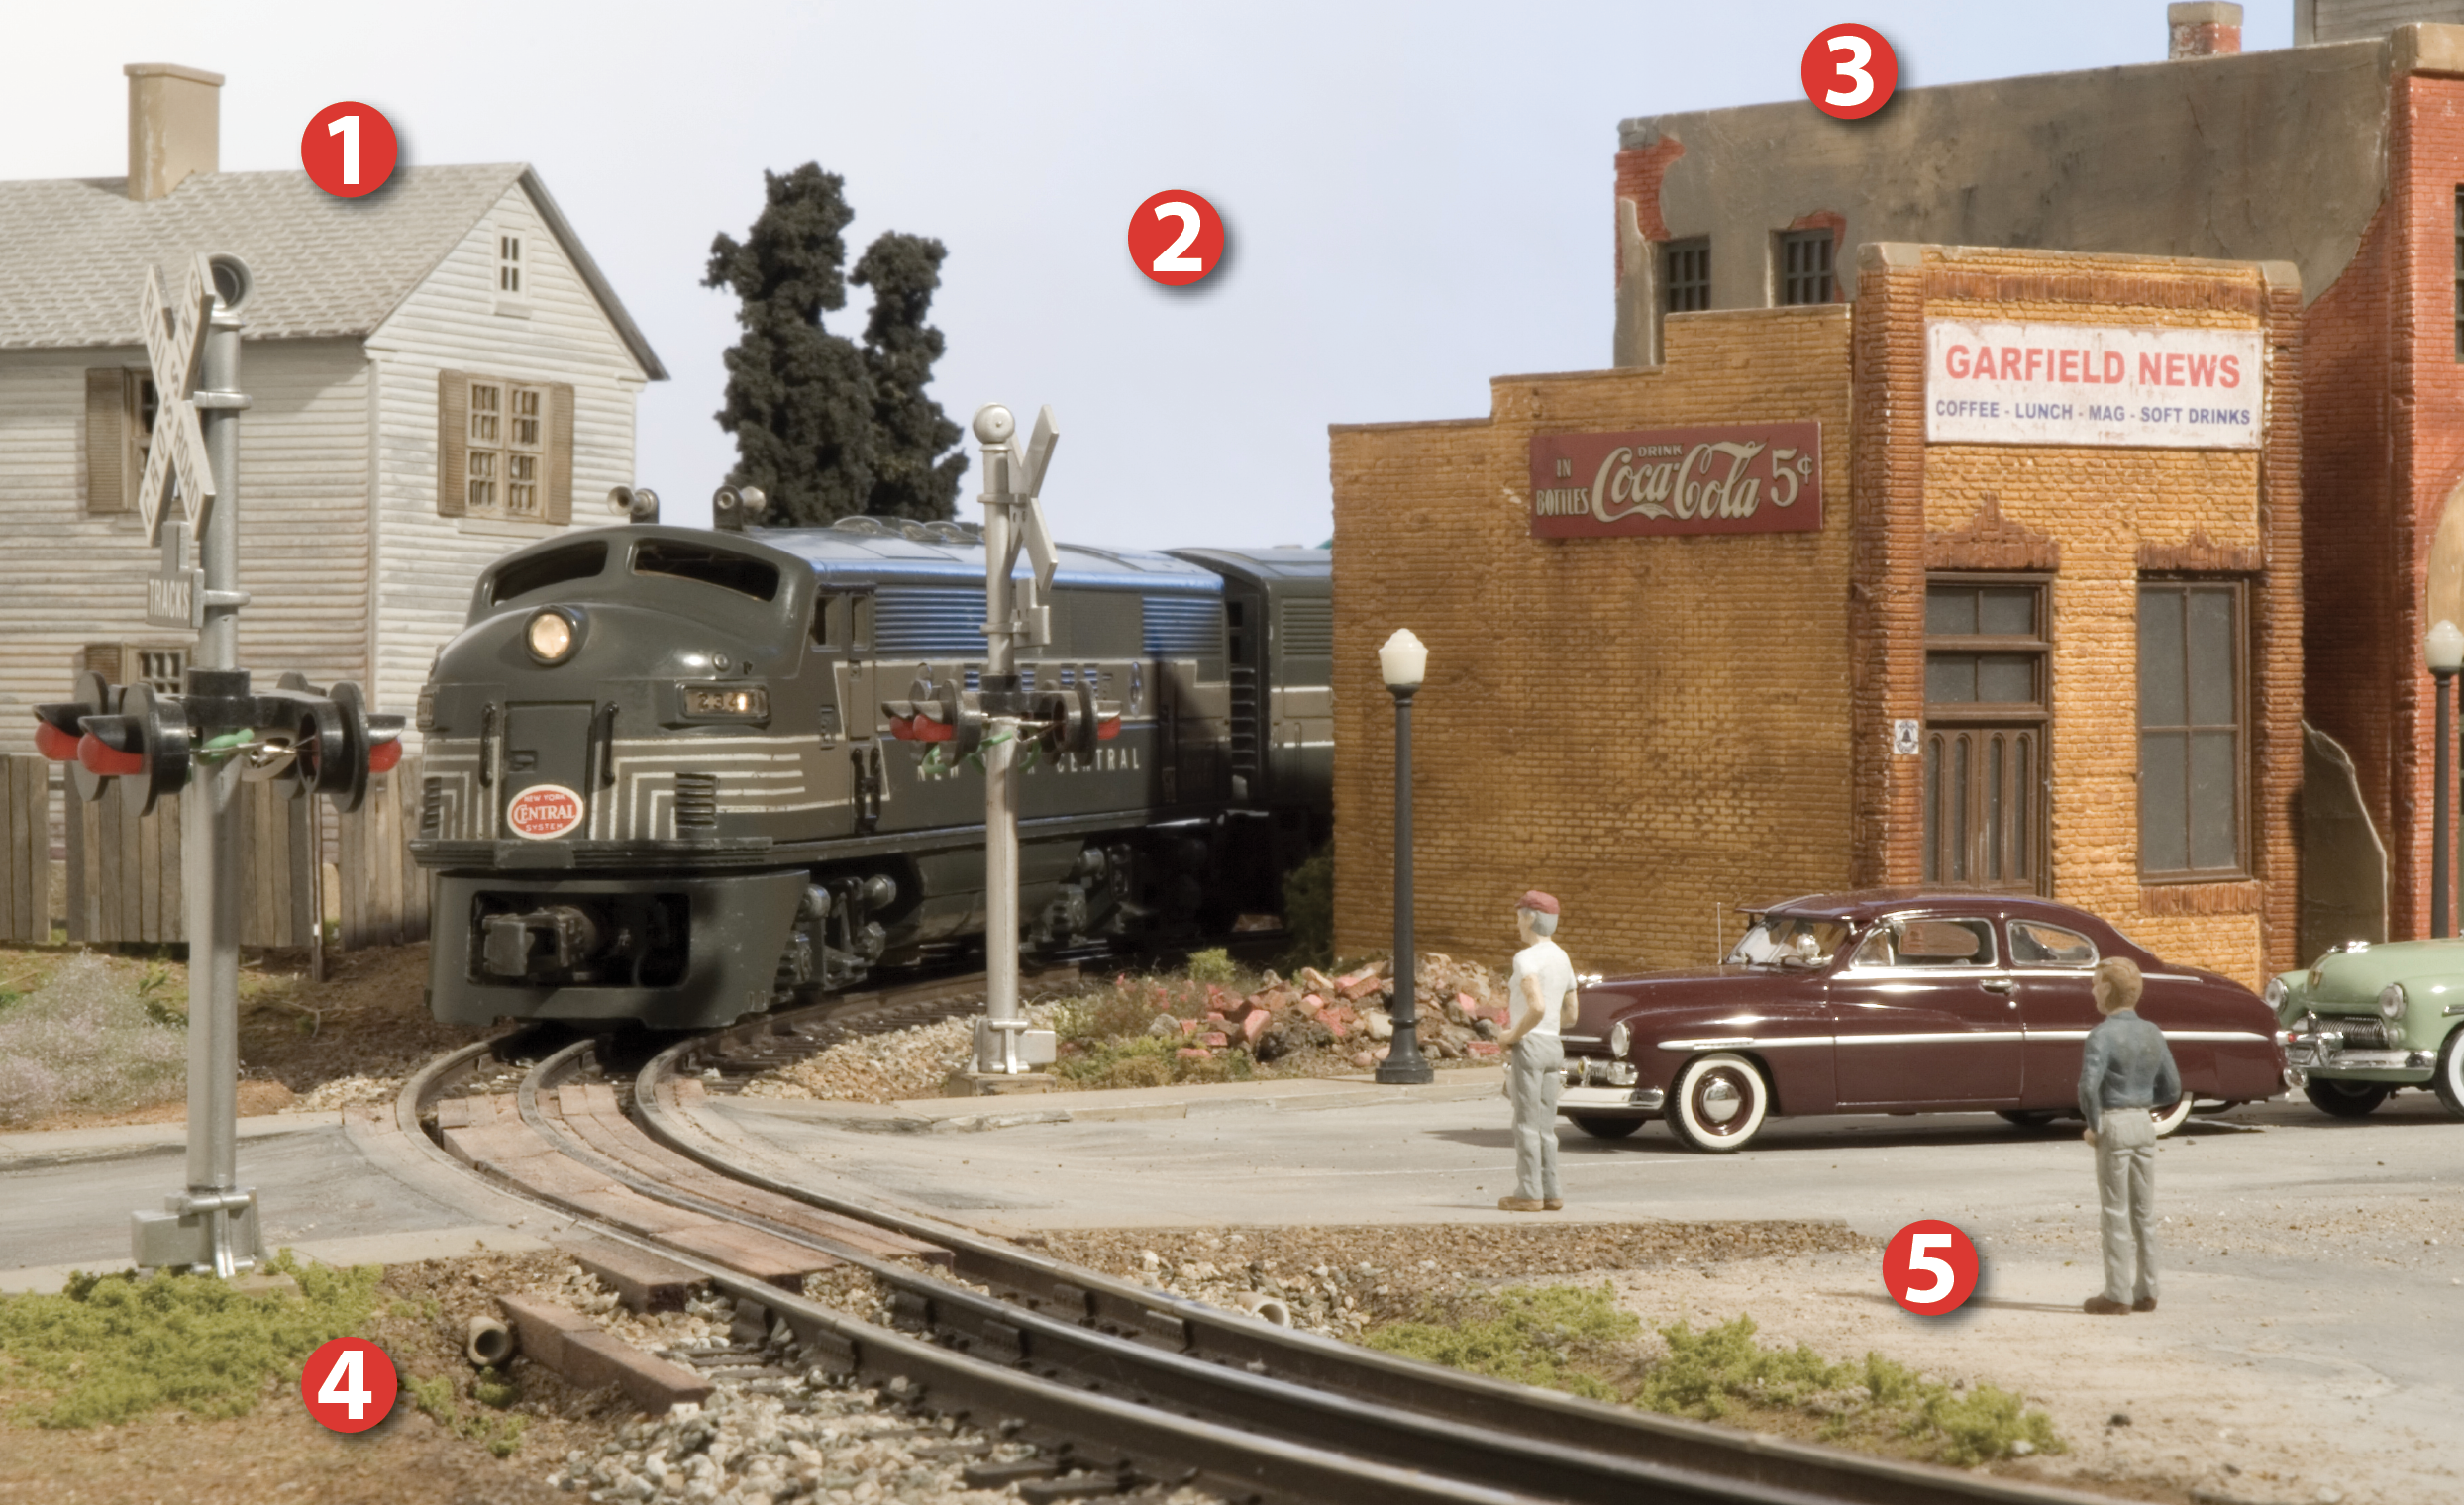 Toy train grade crossing depicting the transition era as a New York Central cab unit approaches a crossing and stopped traffic. Five numerals in red circles 1 through 5 highlight portions of the scene discussed in the text. Photo by Dennis Brennan